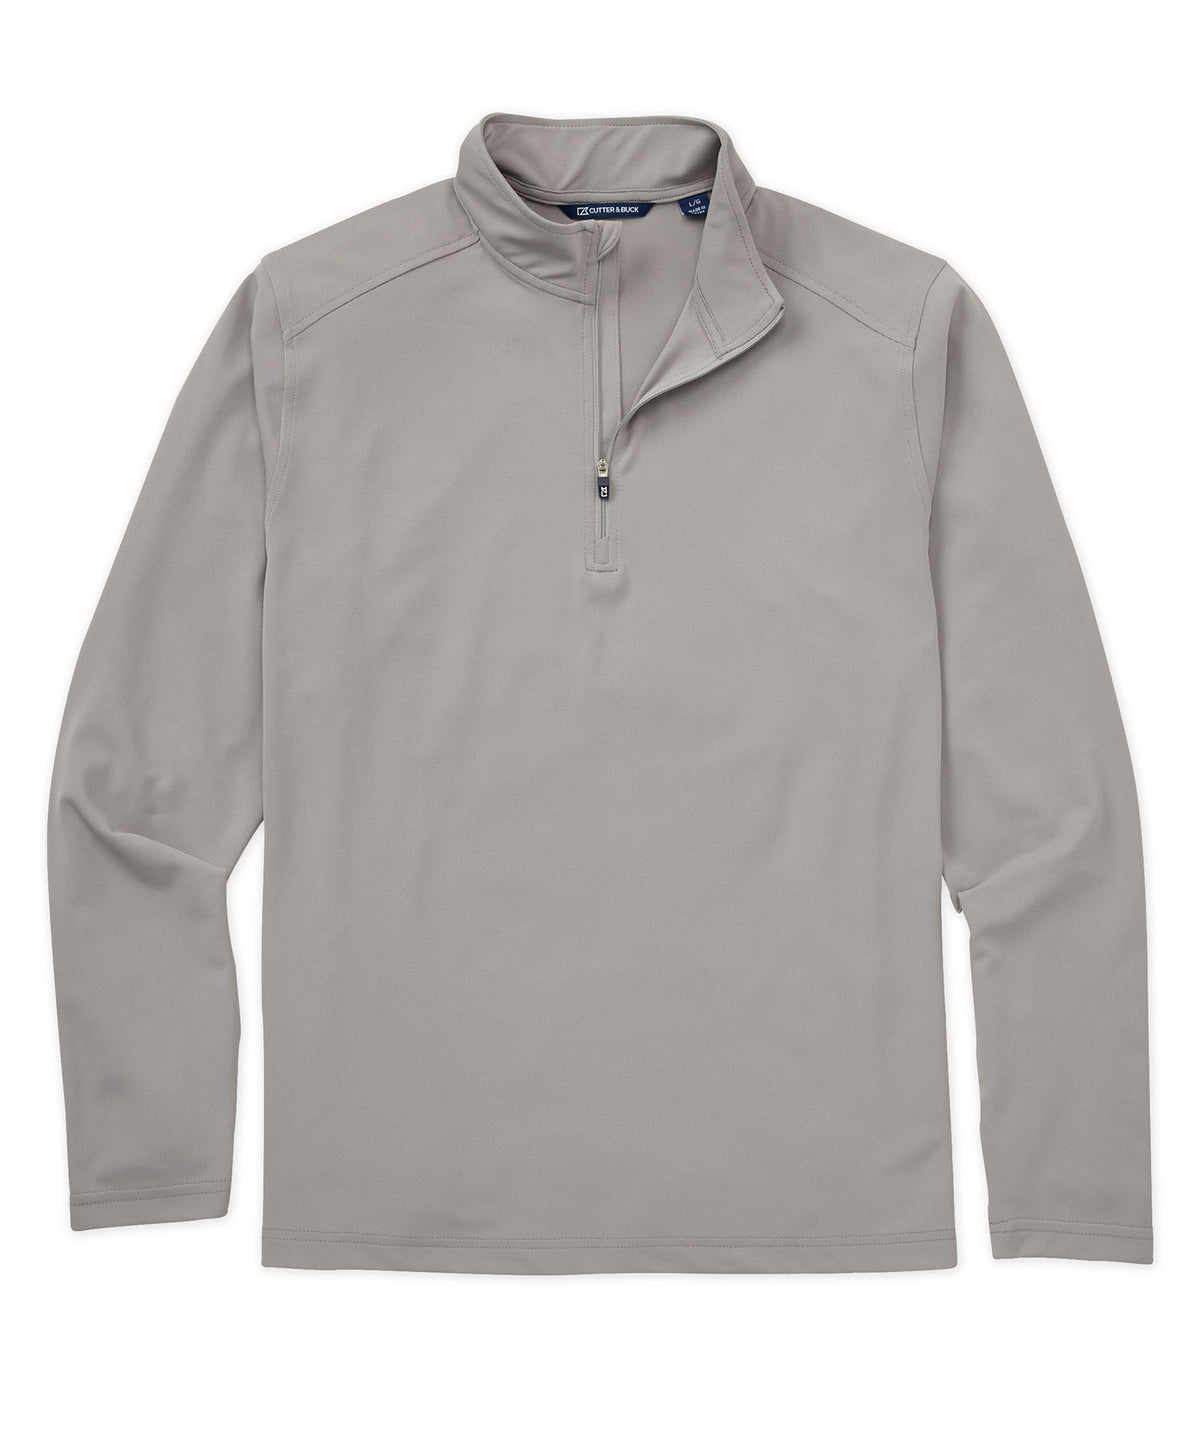 Cutter & Buck Virtue Eco Pique Recycled Quarter Zip Pullover, Big & Tall